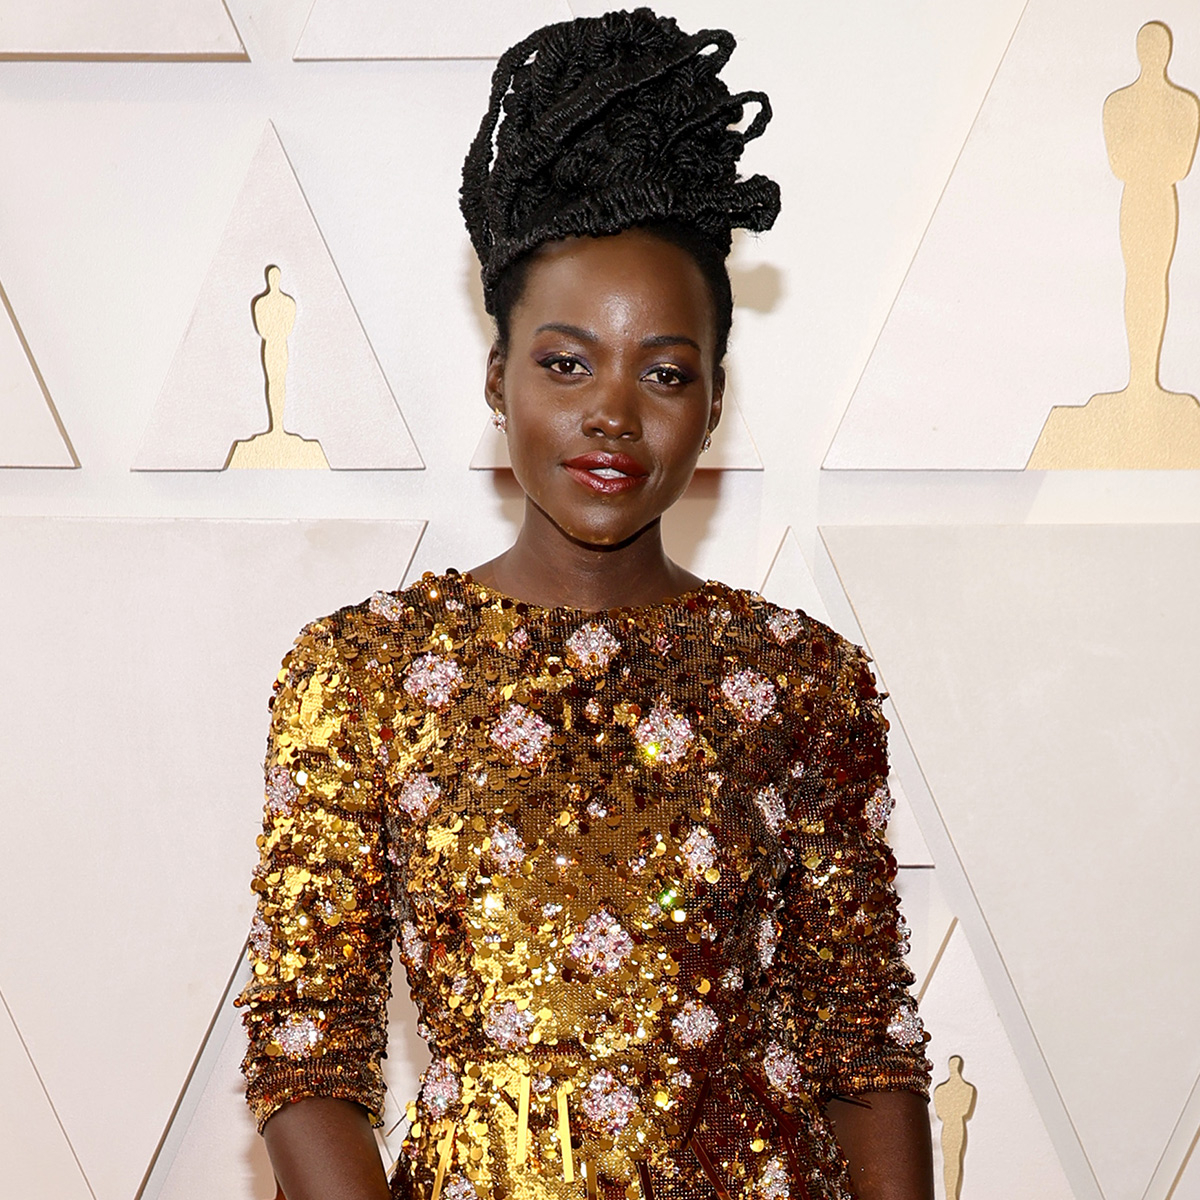 See All the 2022 Oscars Red Carpet Fashion Looks